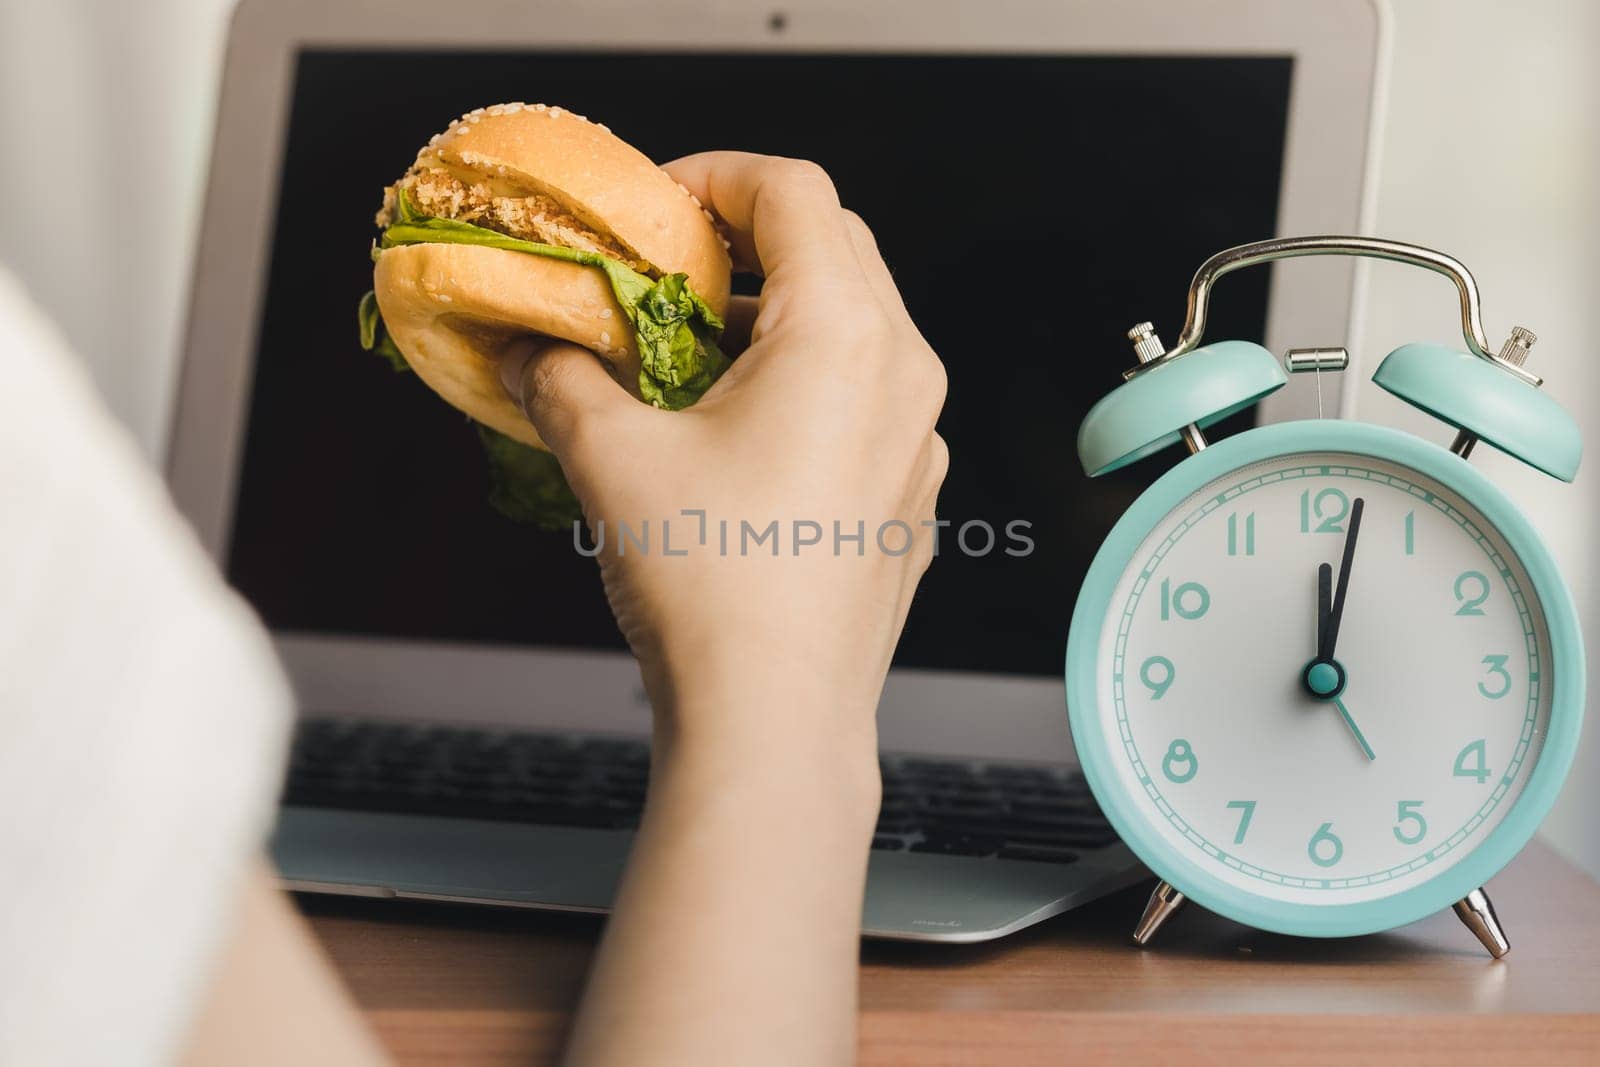 Person eating a hamburger while working, and there is an alarm clock displaying noon time on the work table for the concept of fast food eating at the workplace